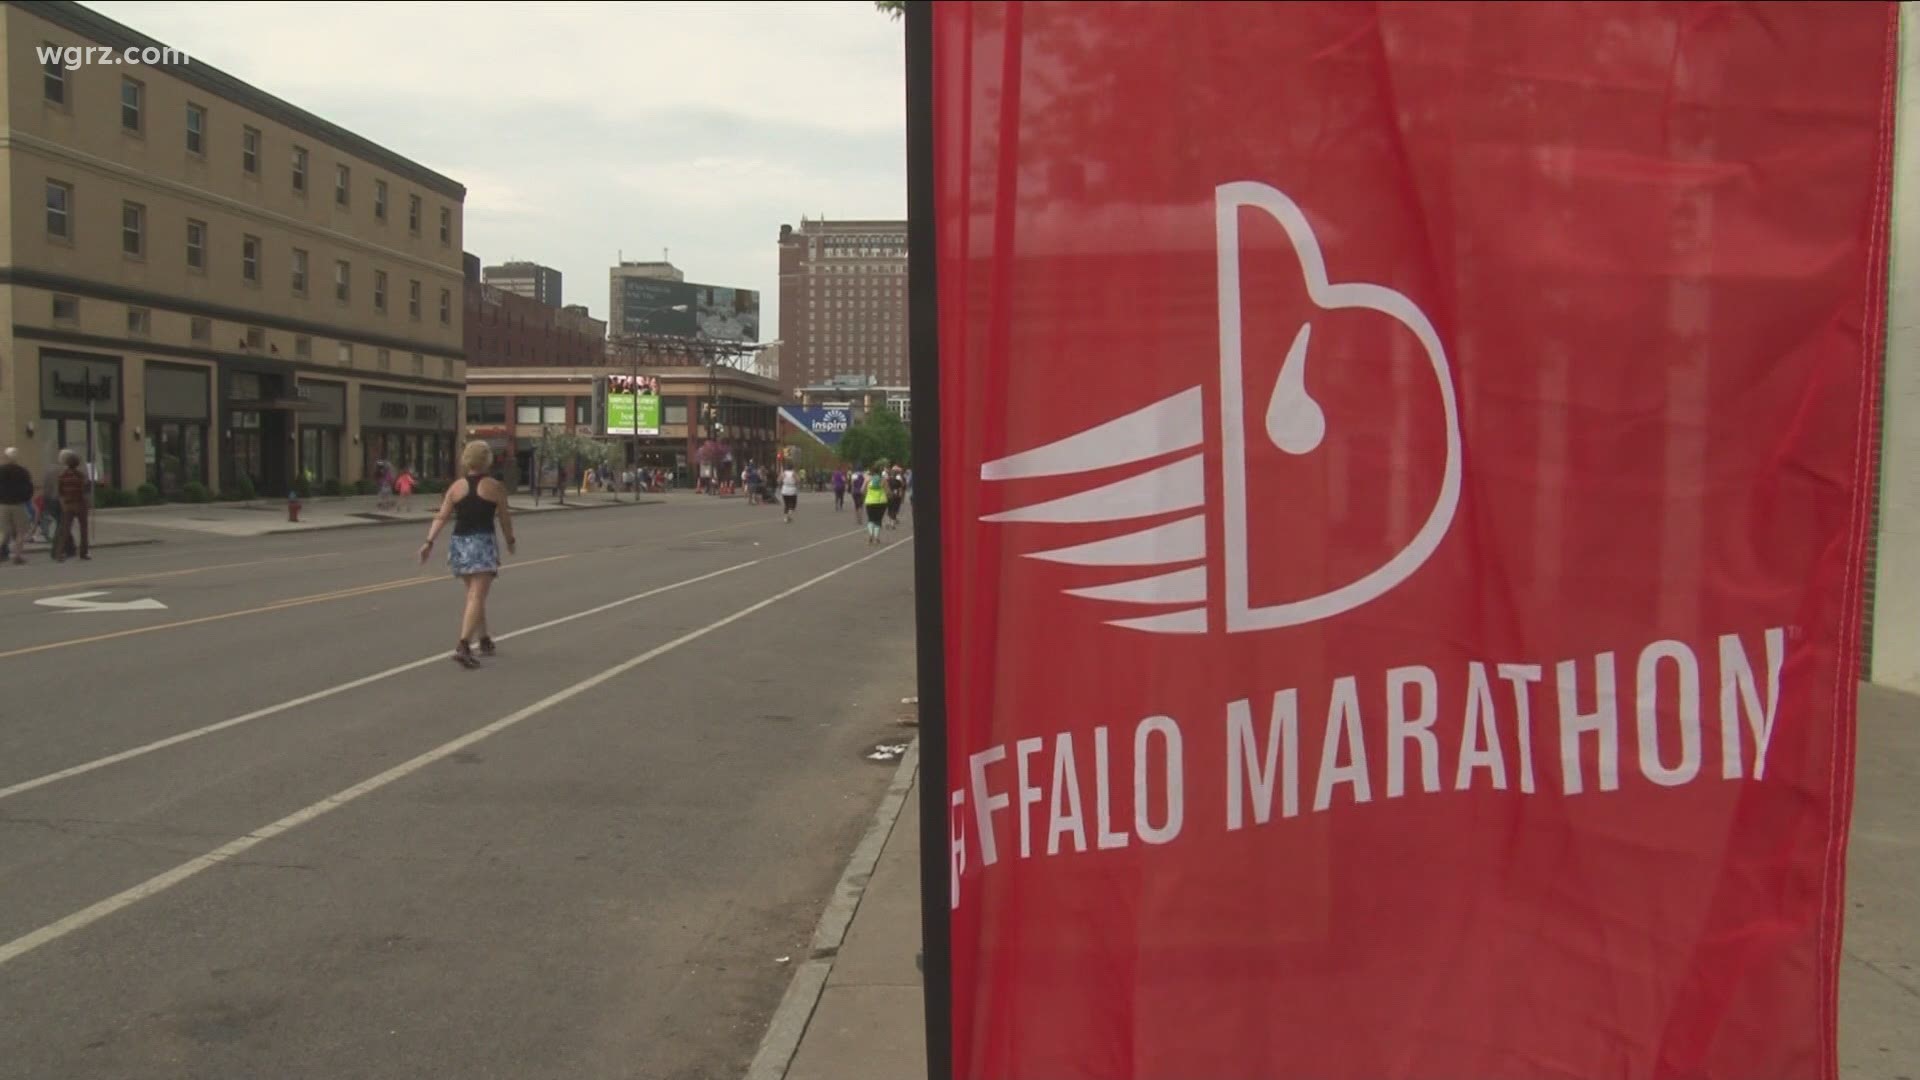 Monday we expect to hear if the date of the race in May will happen. Organizers say they will go live at 6pm on their Facebook to give an update.